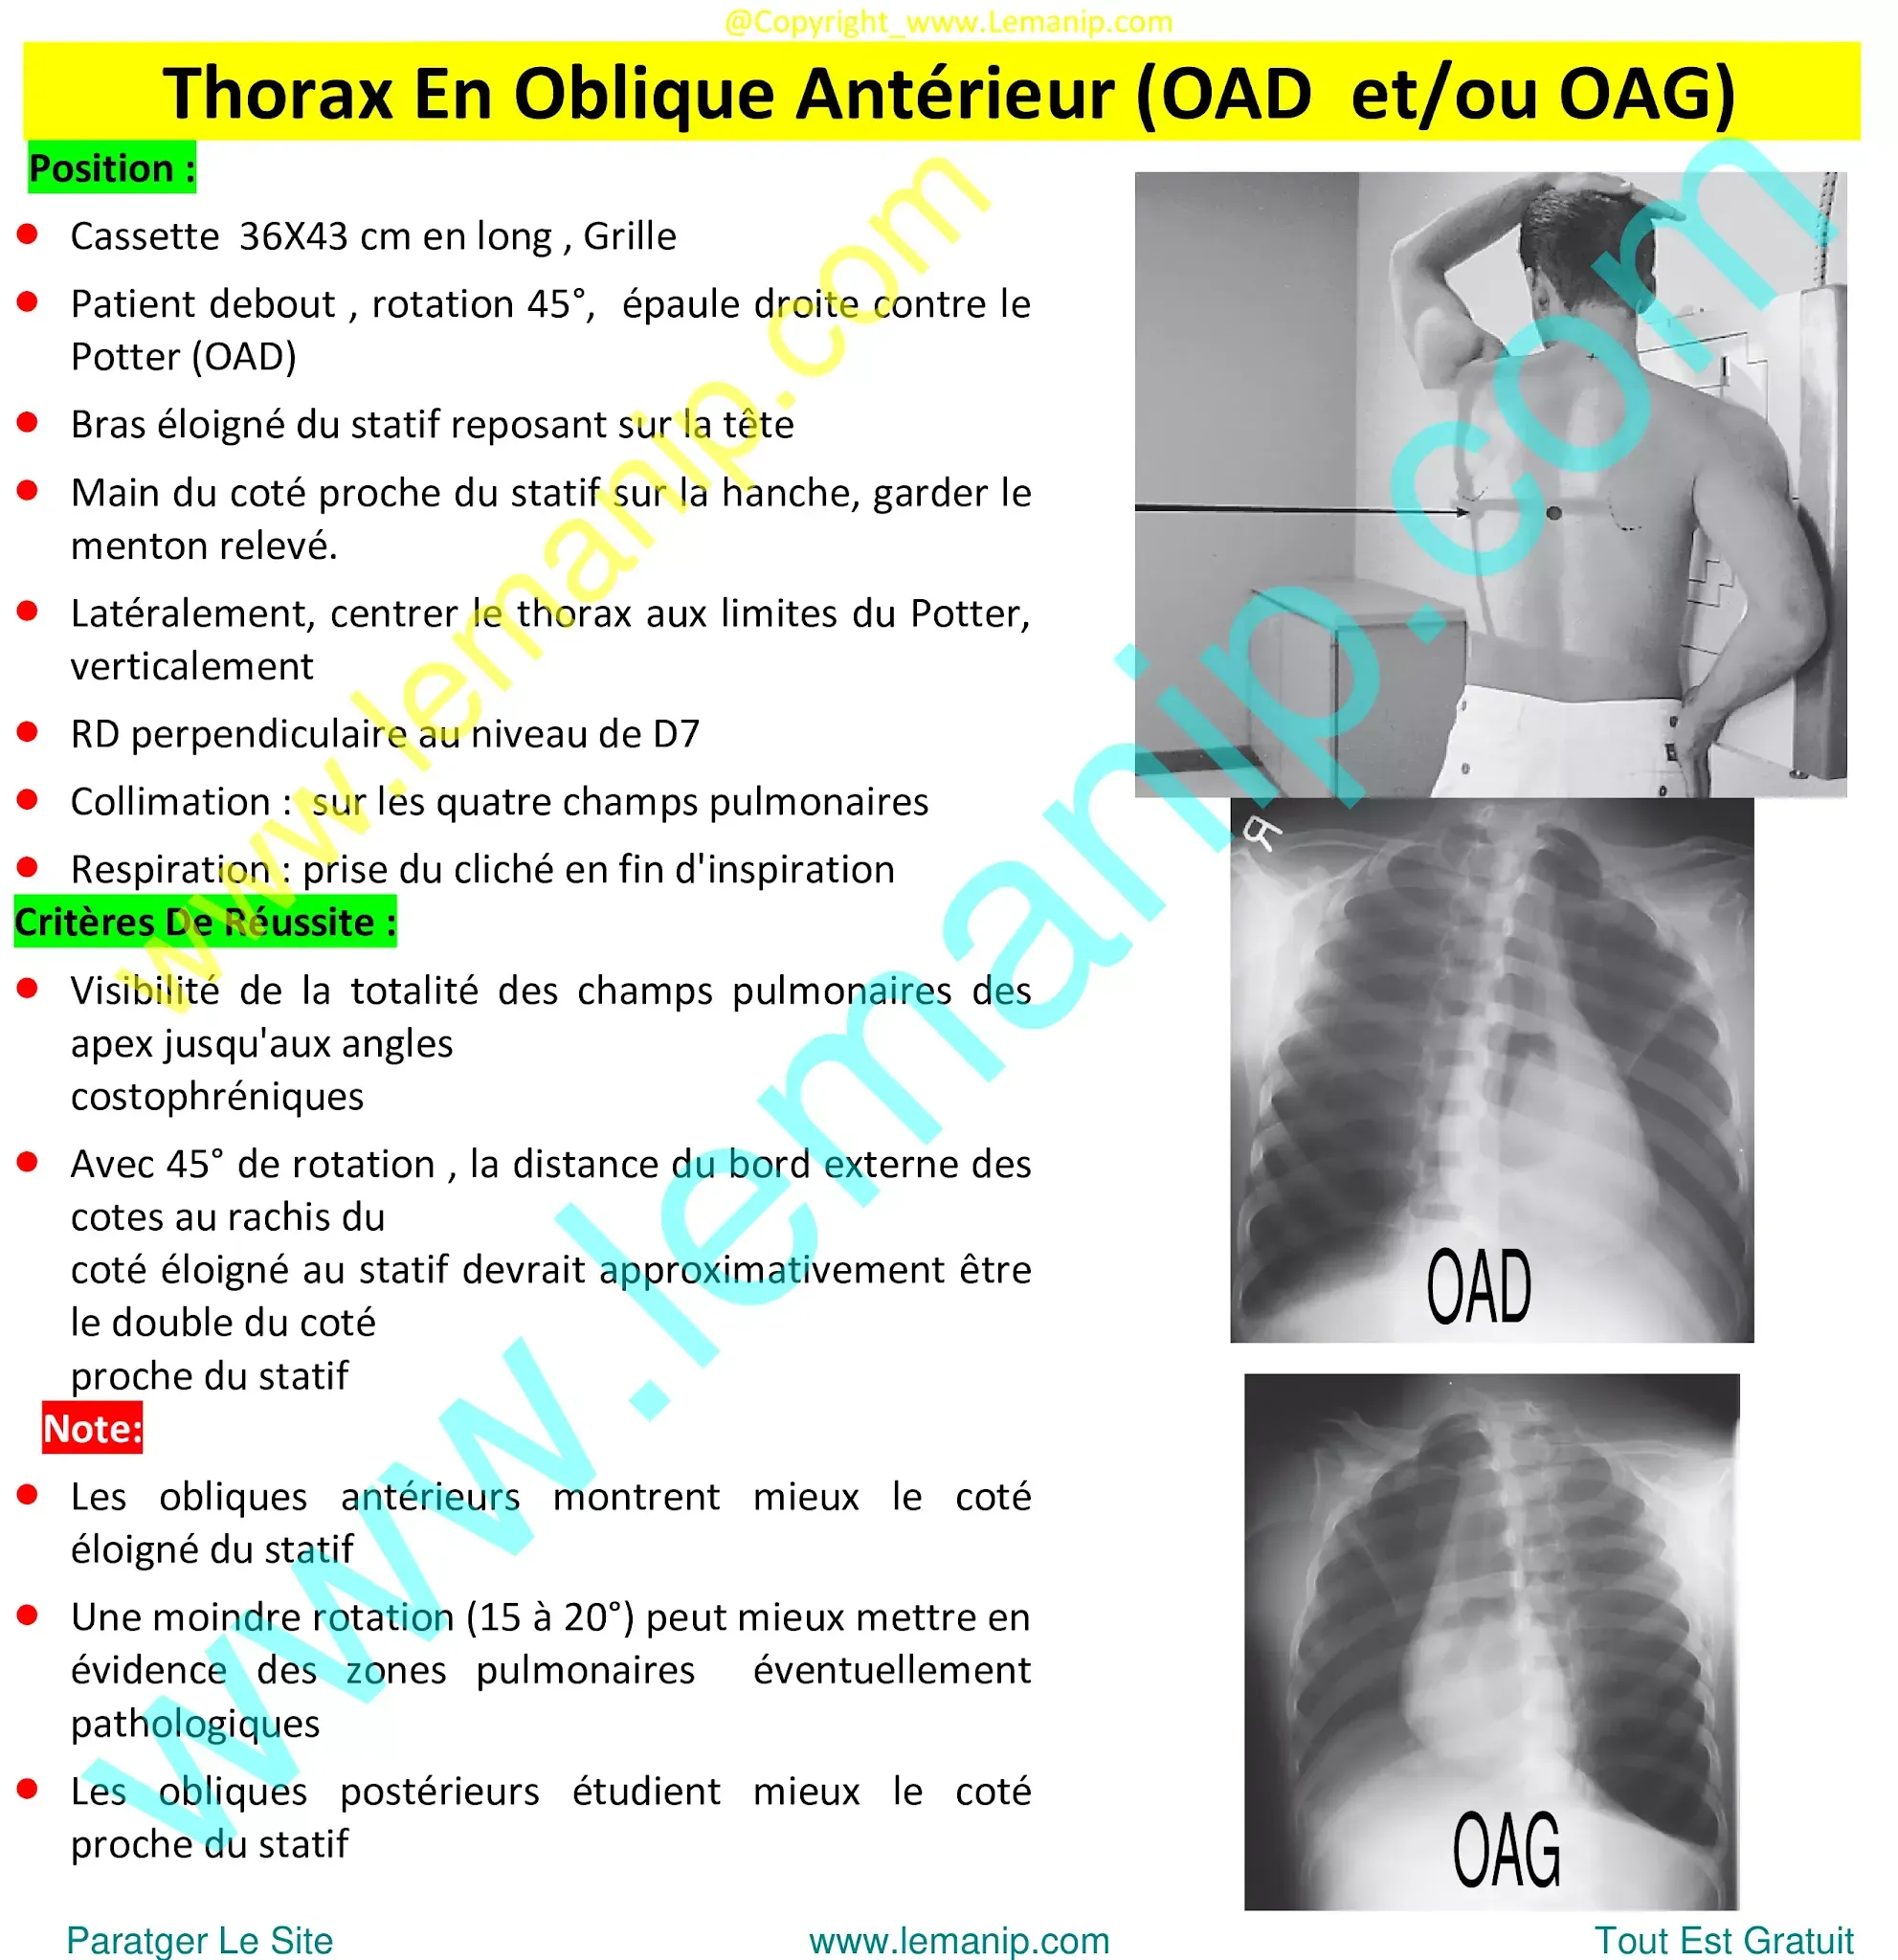 mesothelioma chest x ray,asbestos lung x ray,asthma chest x ray,asthma lungs x ray,urgent care with chest x ray near me,chest xray pa and lateral,ppd chest x ray,chest xray tb,chest x ray pa and lateral,chest xray pa lateral